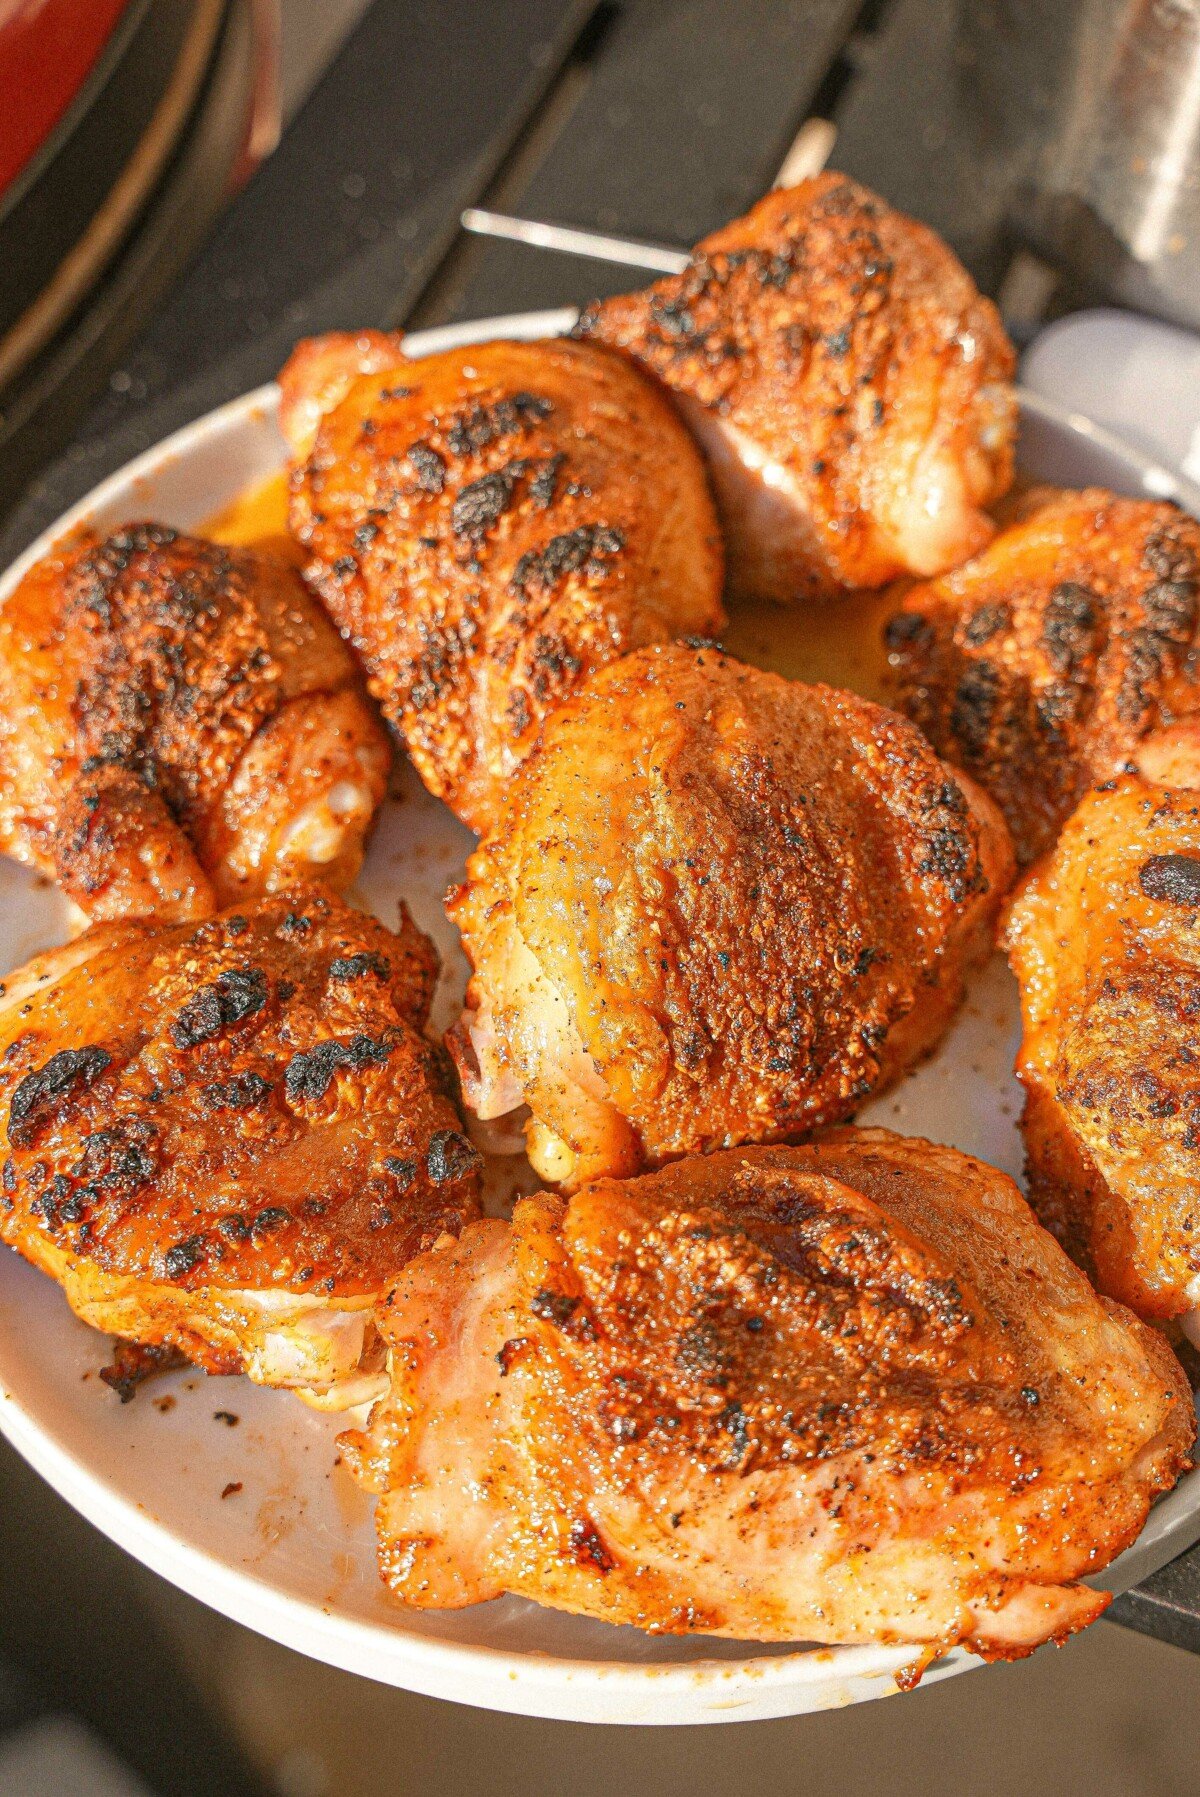 Cooked grilled chicken thighs with crispy skin on a plate.